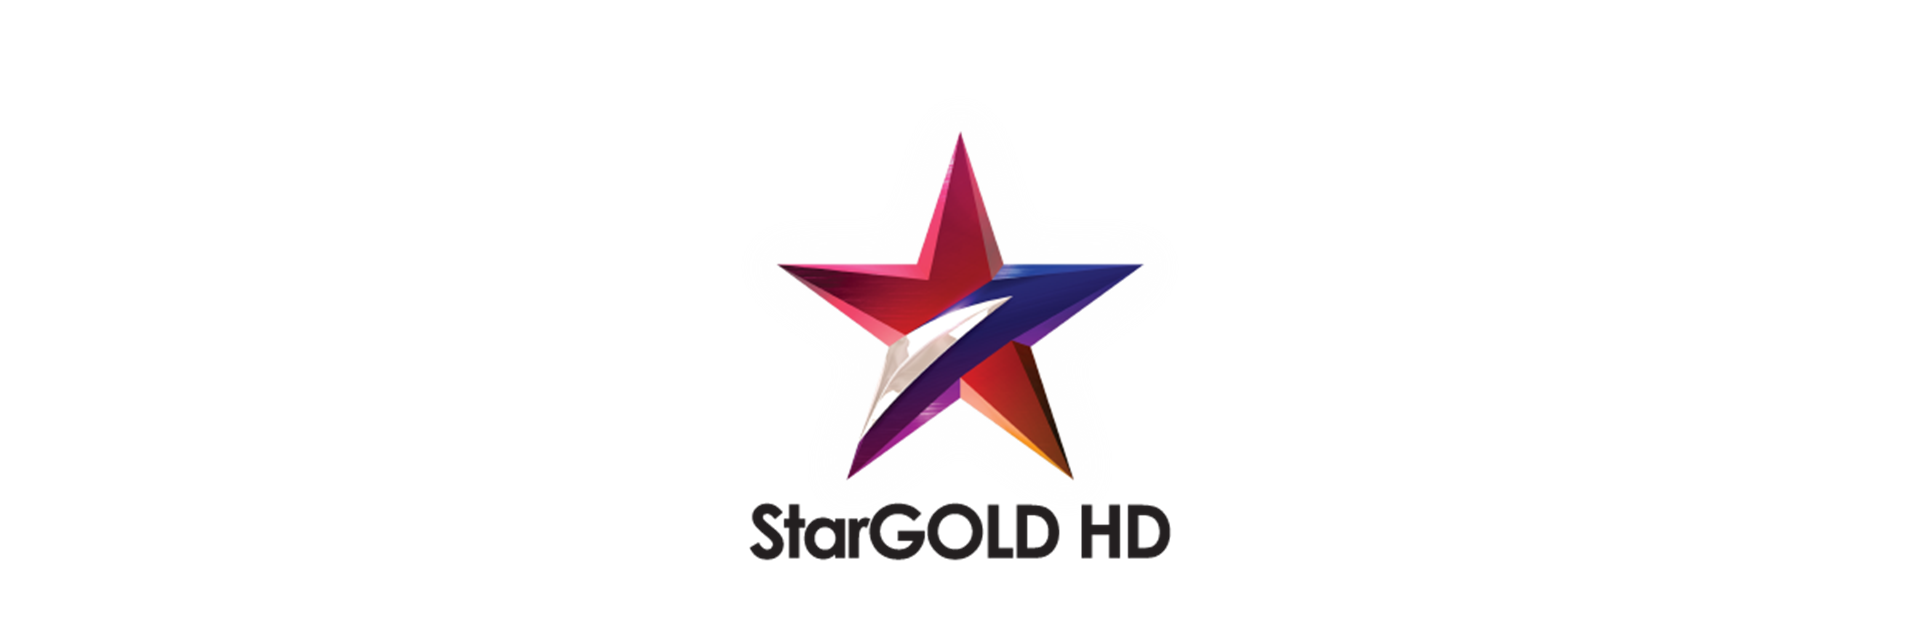 star_channel_logos-70.png